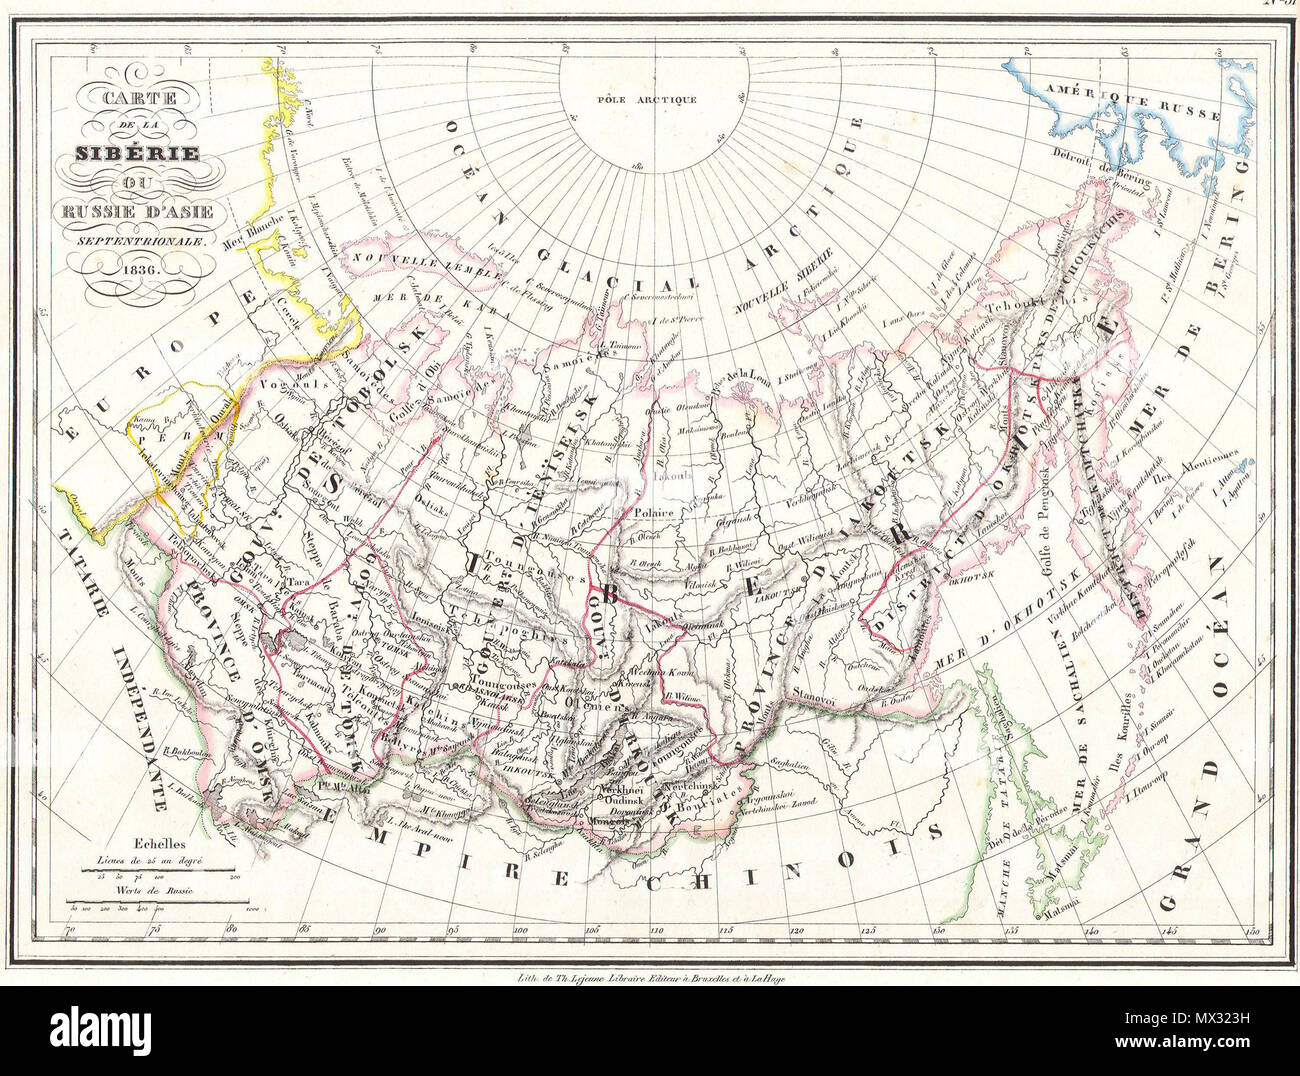 . Carte de la Siberie ou Russie d’Asie Septentrionale. 1836..  English: This unusual 1836 map by V. A. Malte-brun depicts Russia in Asia or Siberia. Depicts from the Ural mountains east as far as the Bering Strait and Alaska and as far south as the Chinese Empire. All text in French. . 1836 7 1836 Malte-brun Map of Russia in Asia and Siberia - Geographicus - Siberie-mb-1836 Stock Photo